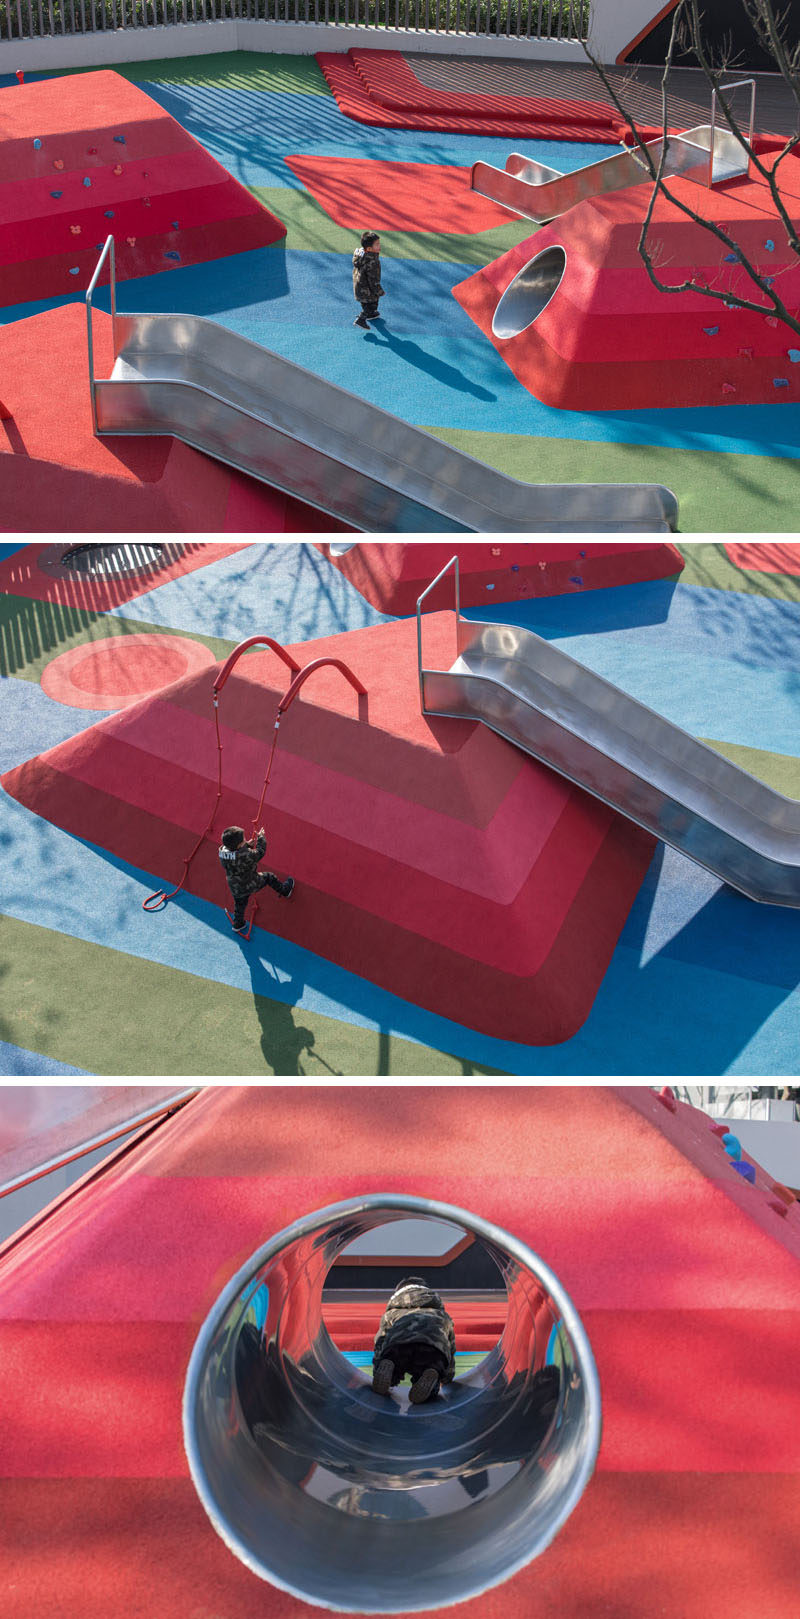 This modern kids playground has mountain-shaped play mounds with tunnels, slides and climbing walls. #Playground #Landscaping